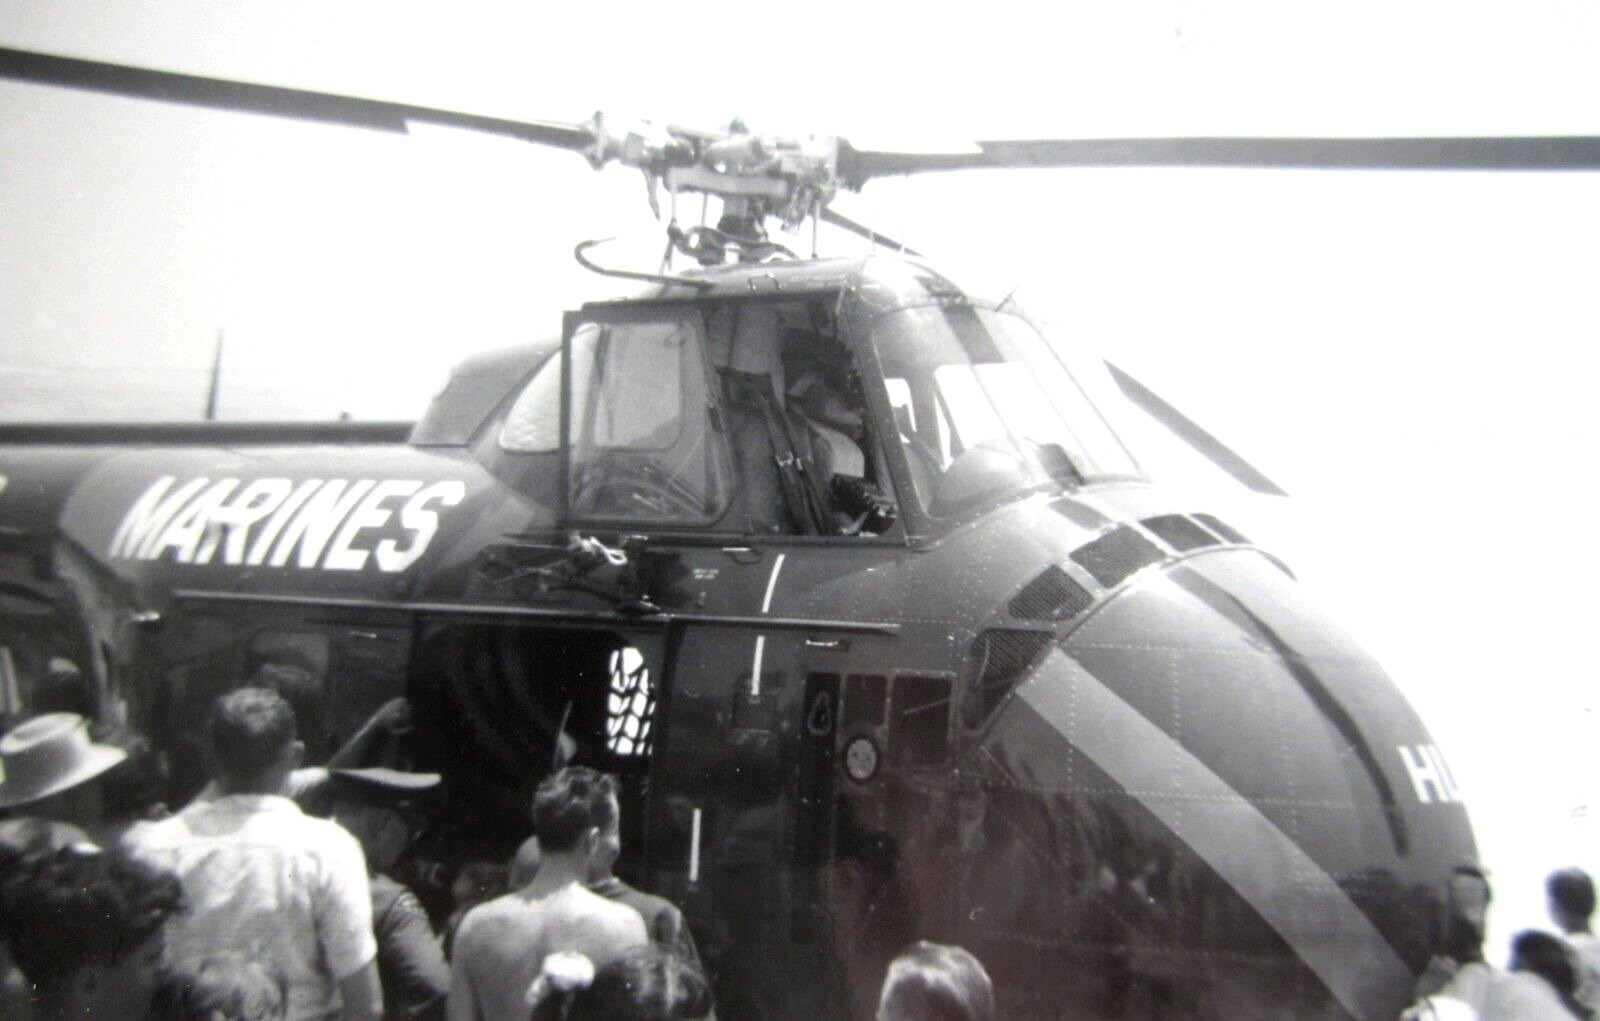 Vintage USMC Helicopter Sikorsky HRS-3 Chickasaw Photos Beach Landing 1950s